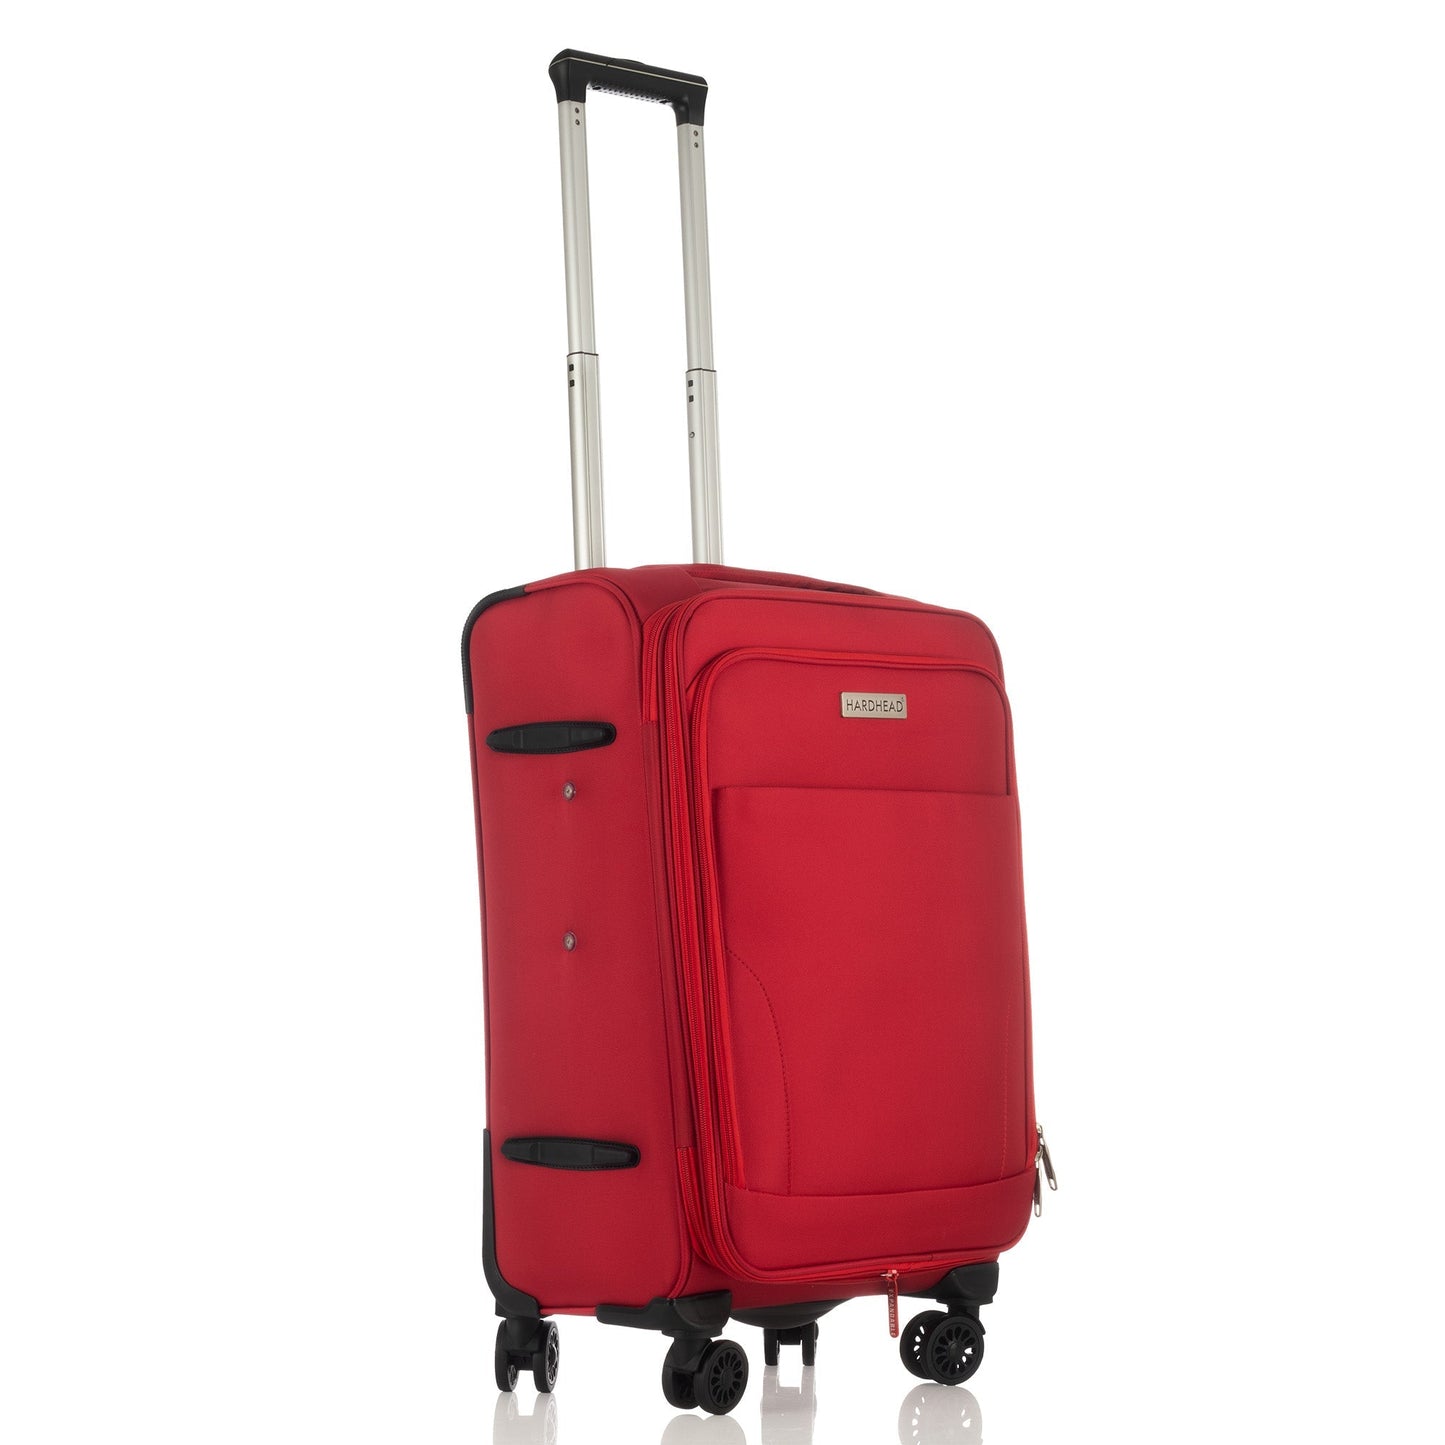 In Heaven Collection Red Luggage 4 Piece Set (18/20/26/30") Suitcase Lock Spinner Soft